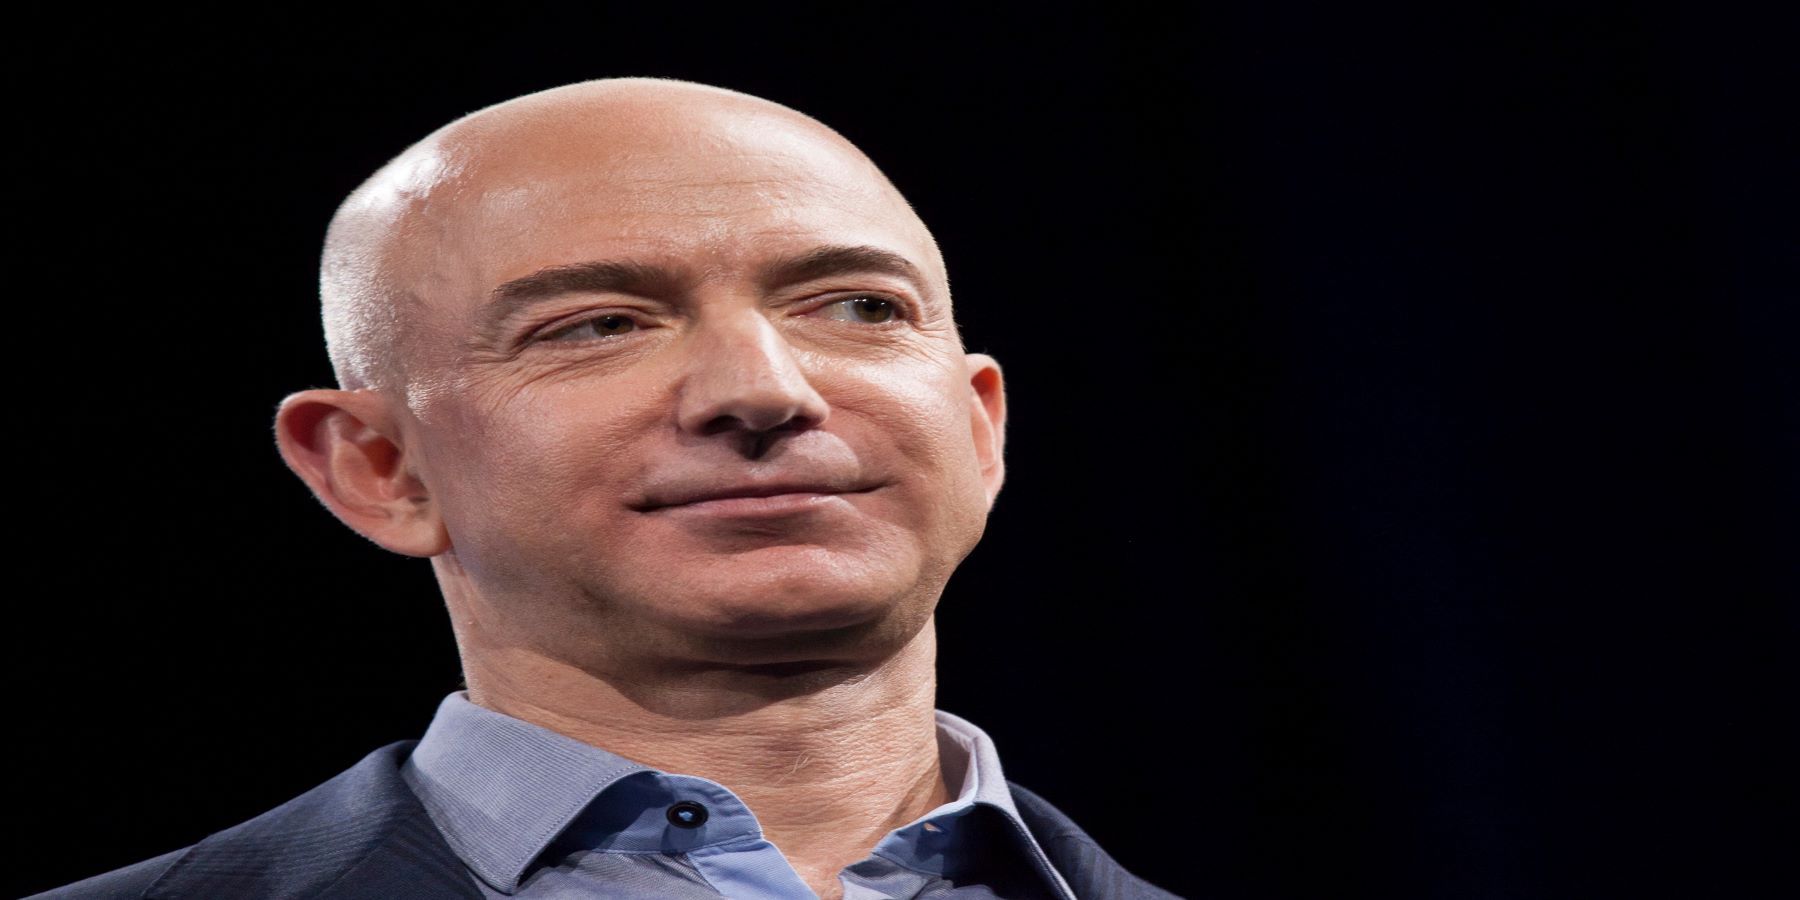 Jeff Bezos images conquer Twitch